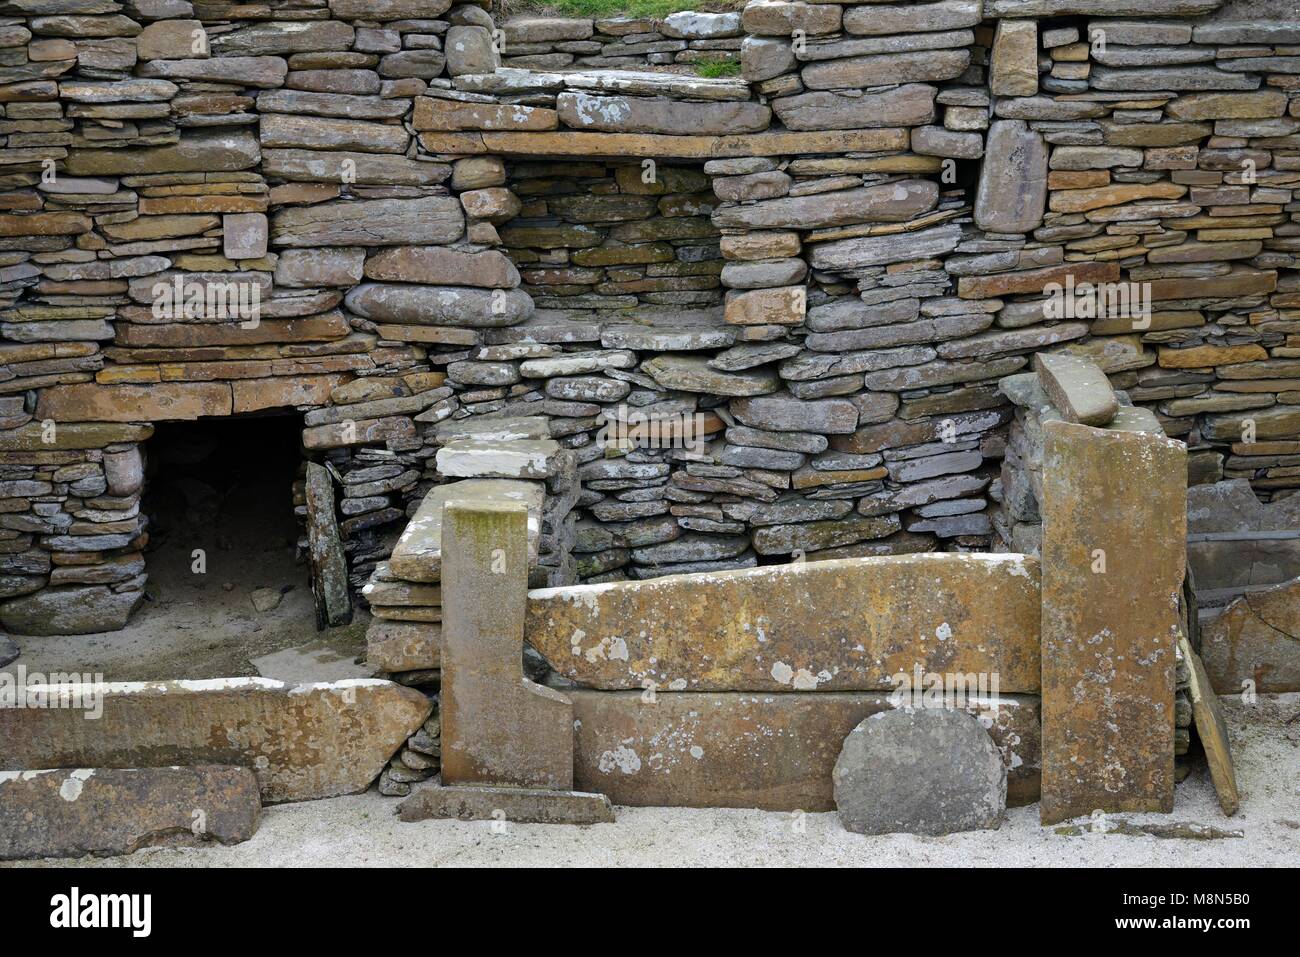 Skara Brae Stone Age Neolithic village at Skaill, Orkney, Scotland. Interior detail of stone box bed and alcoves in House 1. 3100 BC Stock Photo